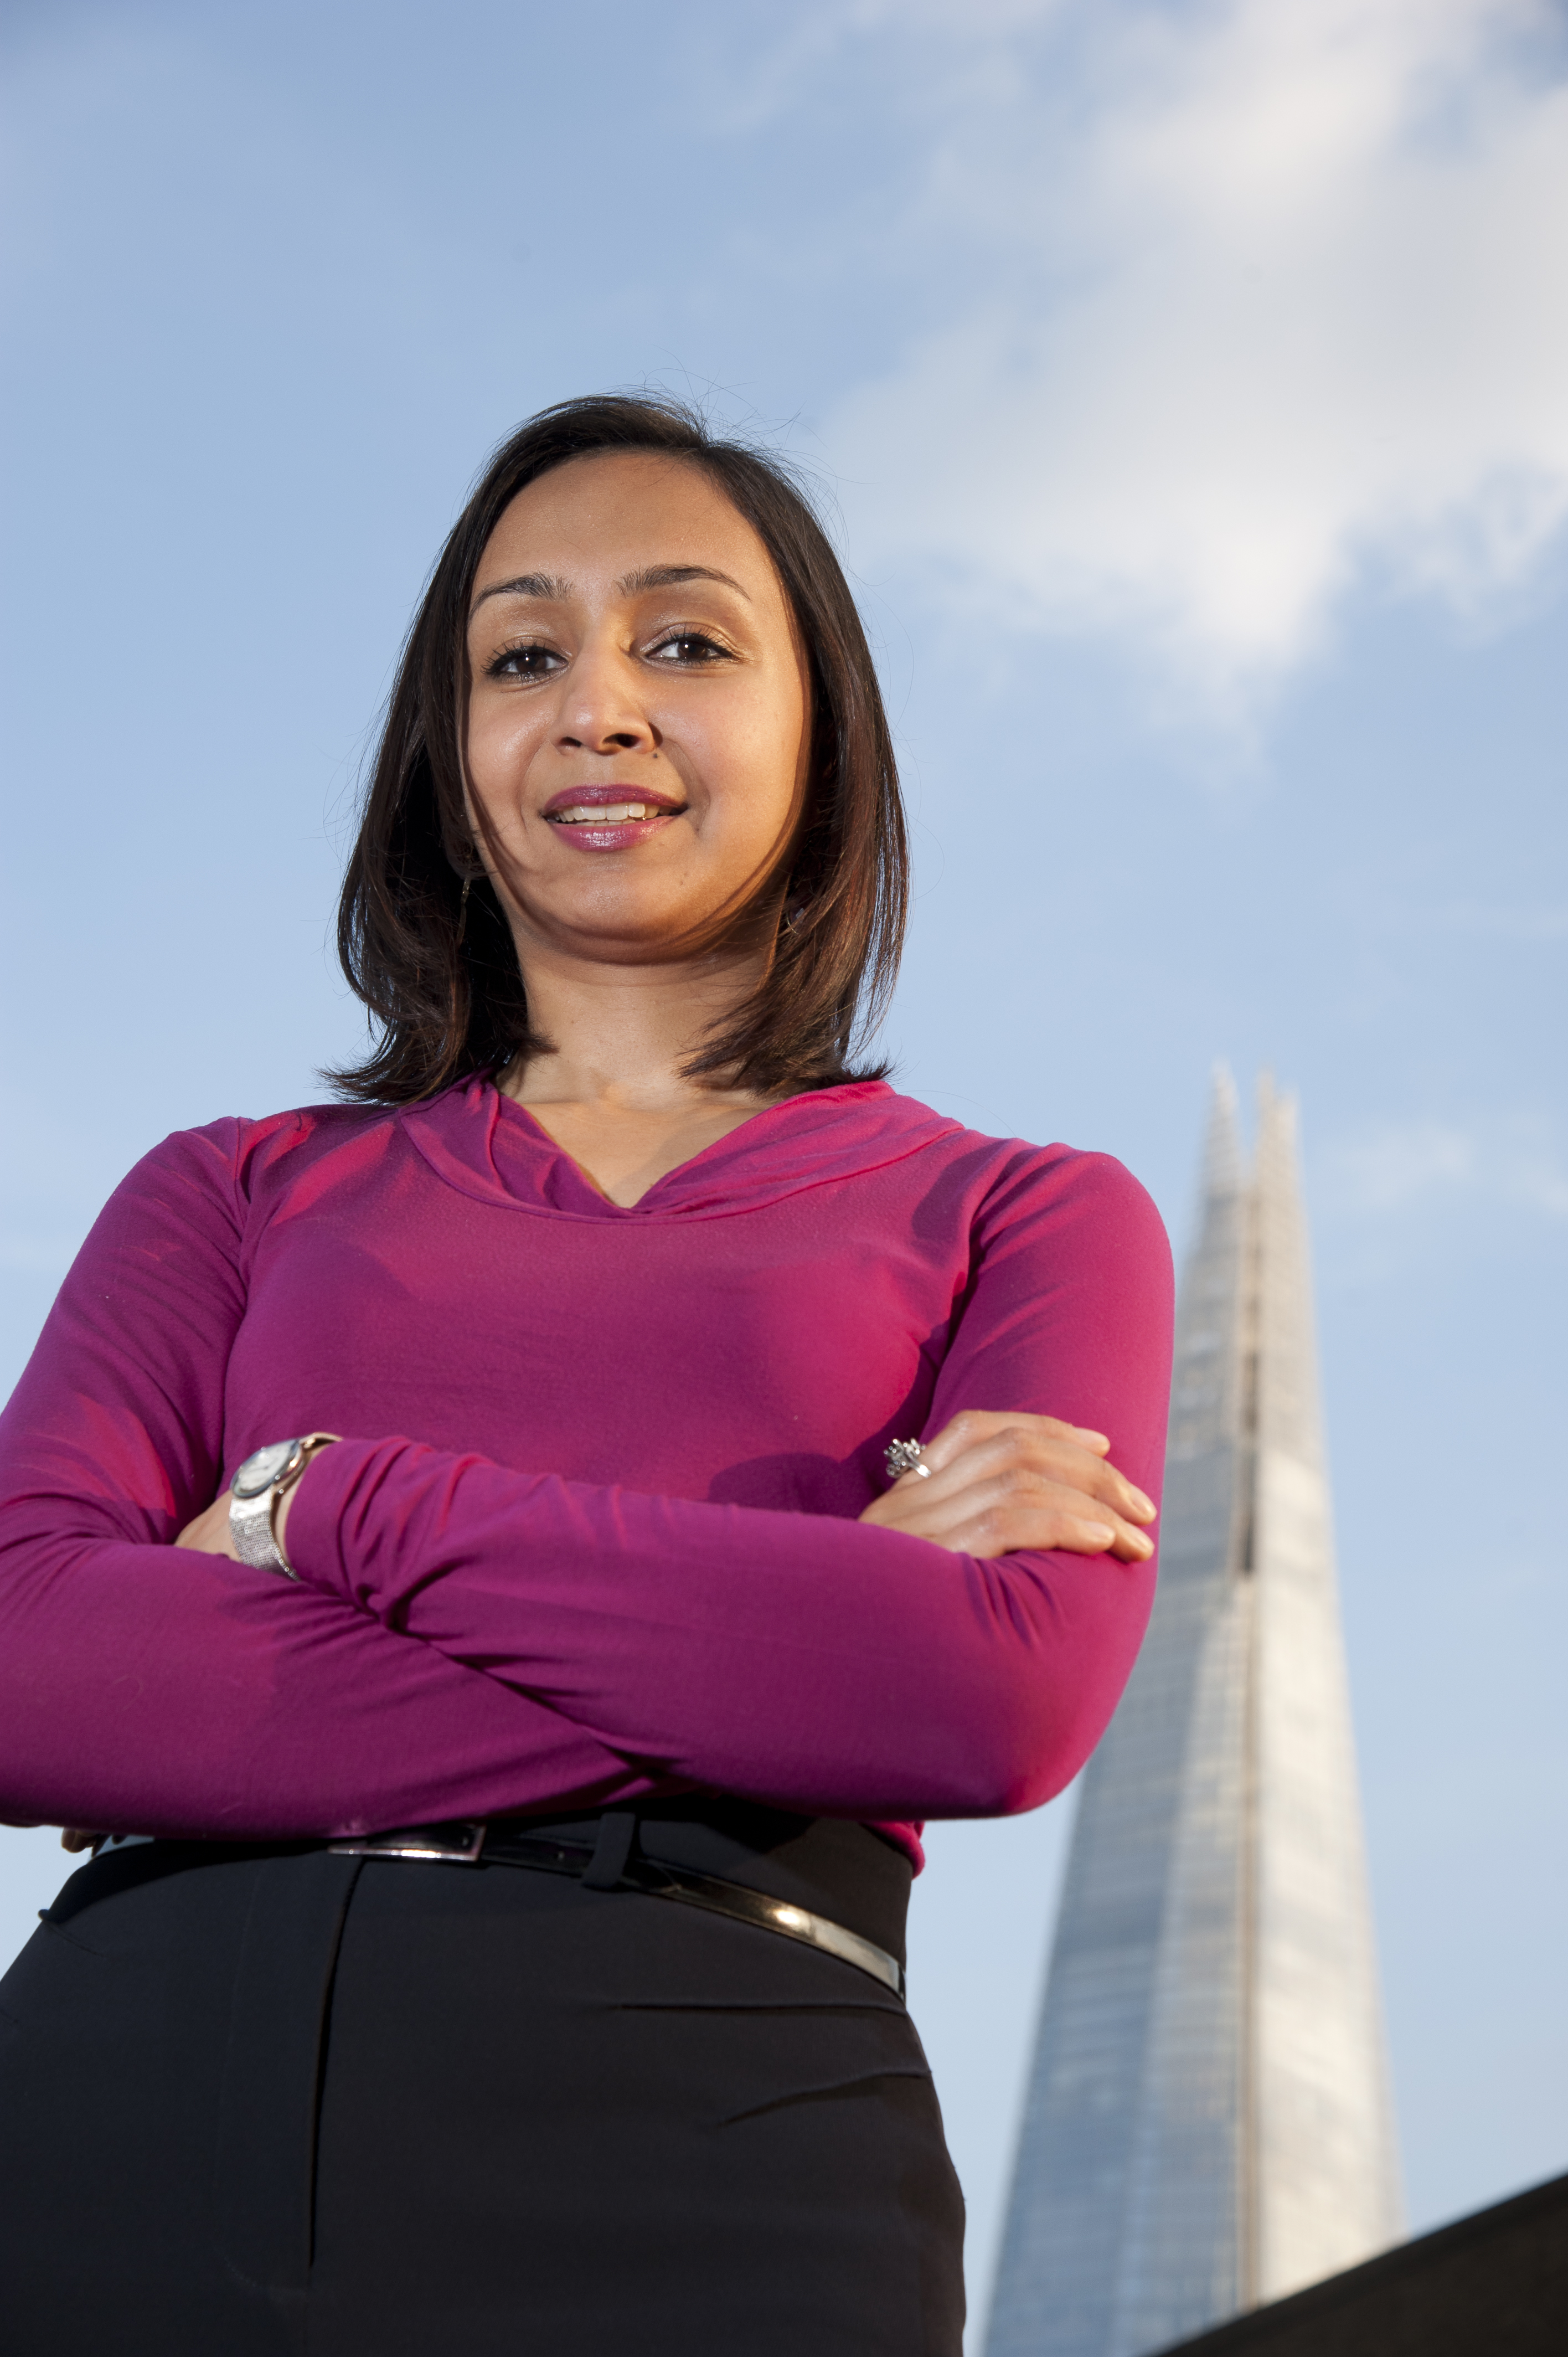 Photograph of Roma Agrawal standing in front of The Shard.